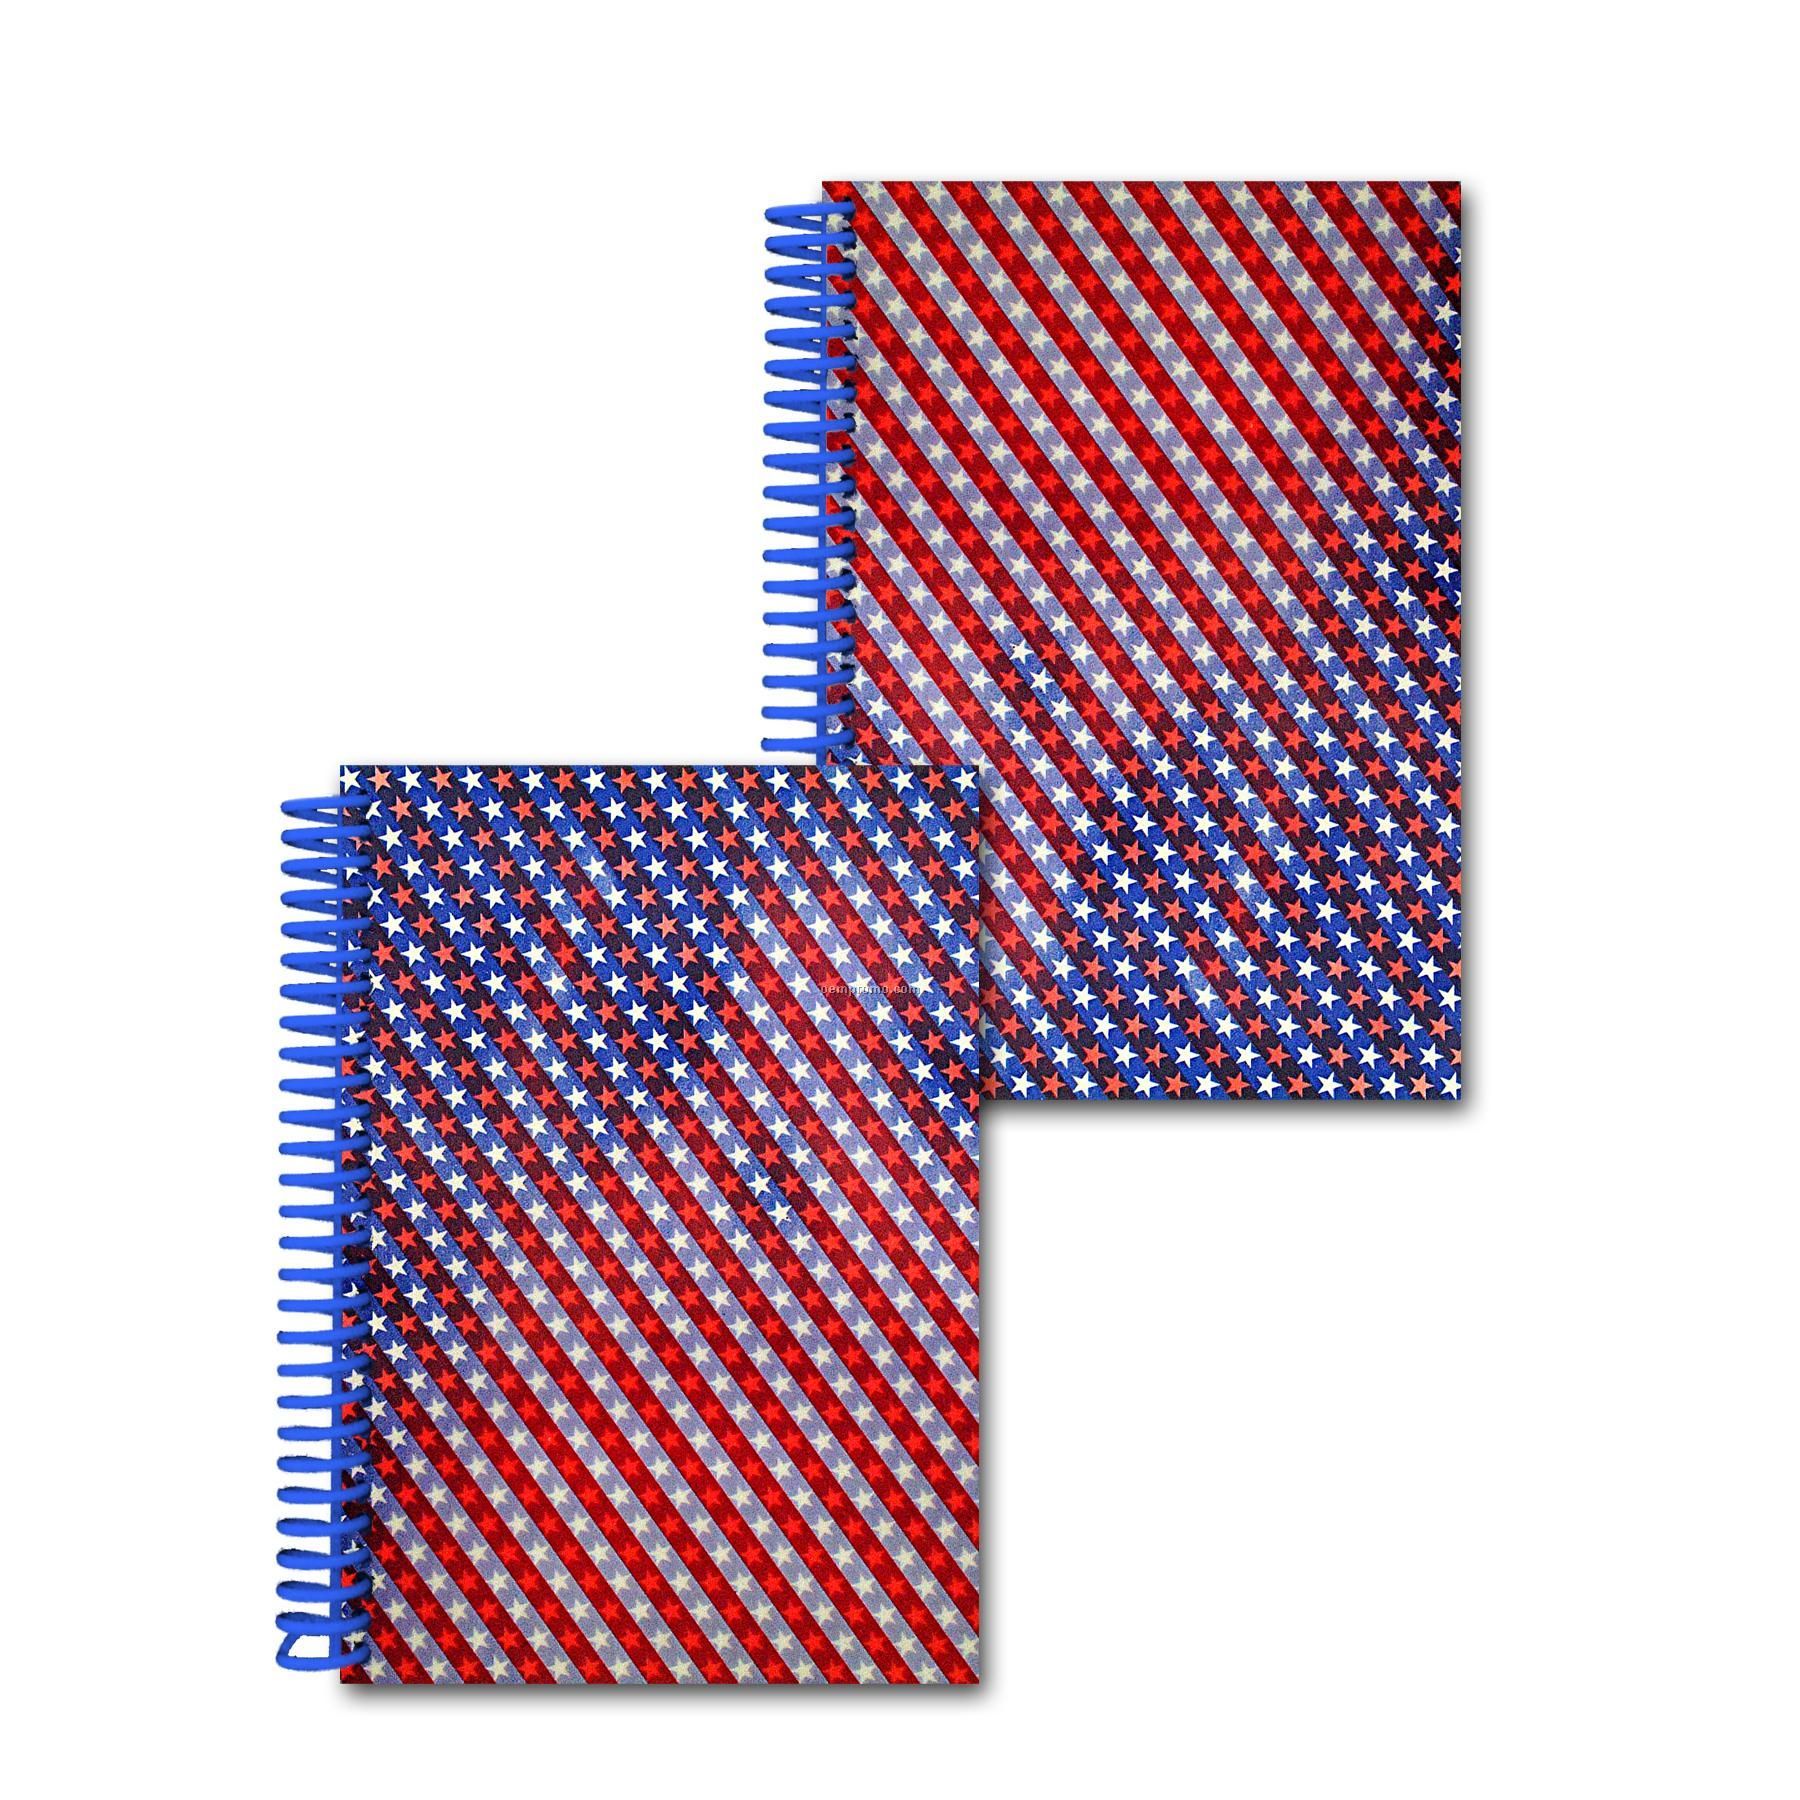 3d Lenticular Notebook Stock/Animated Stars And Stripes (Blanks)